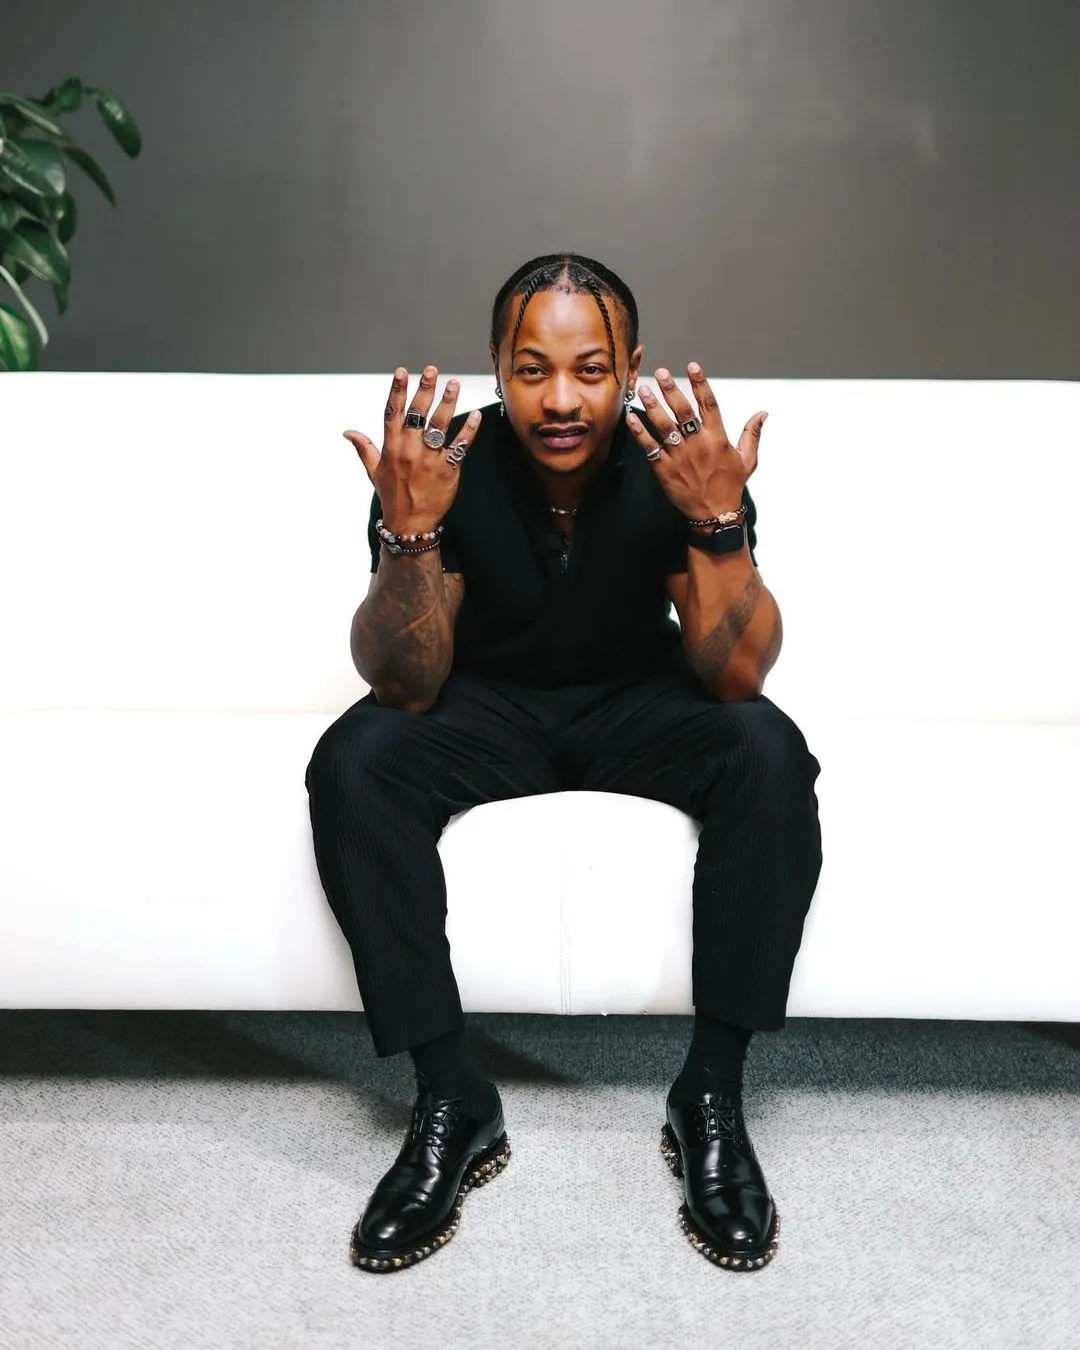 Priddy Ugly announces he’s quitting music